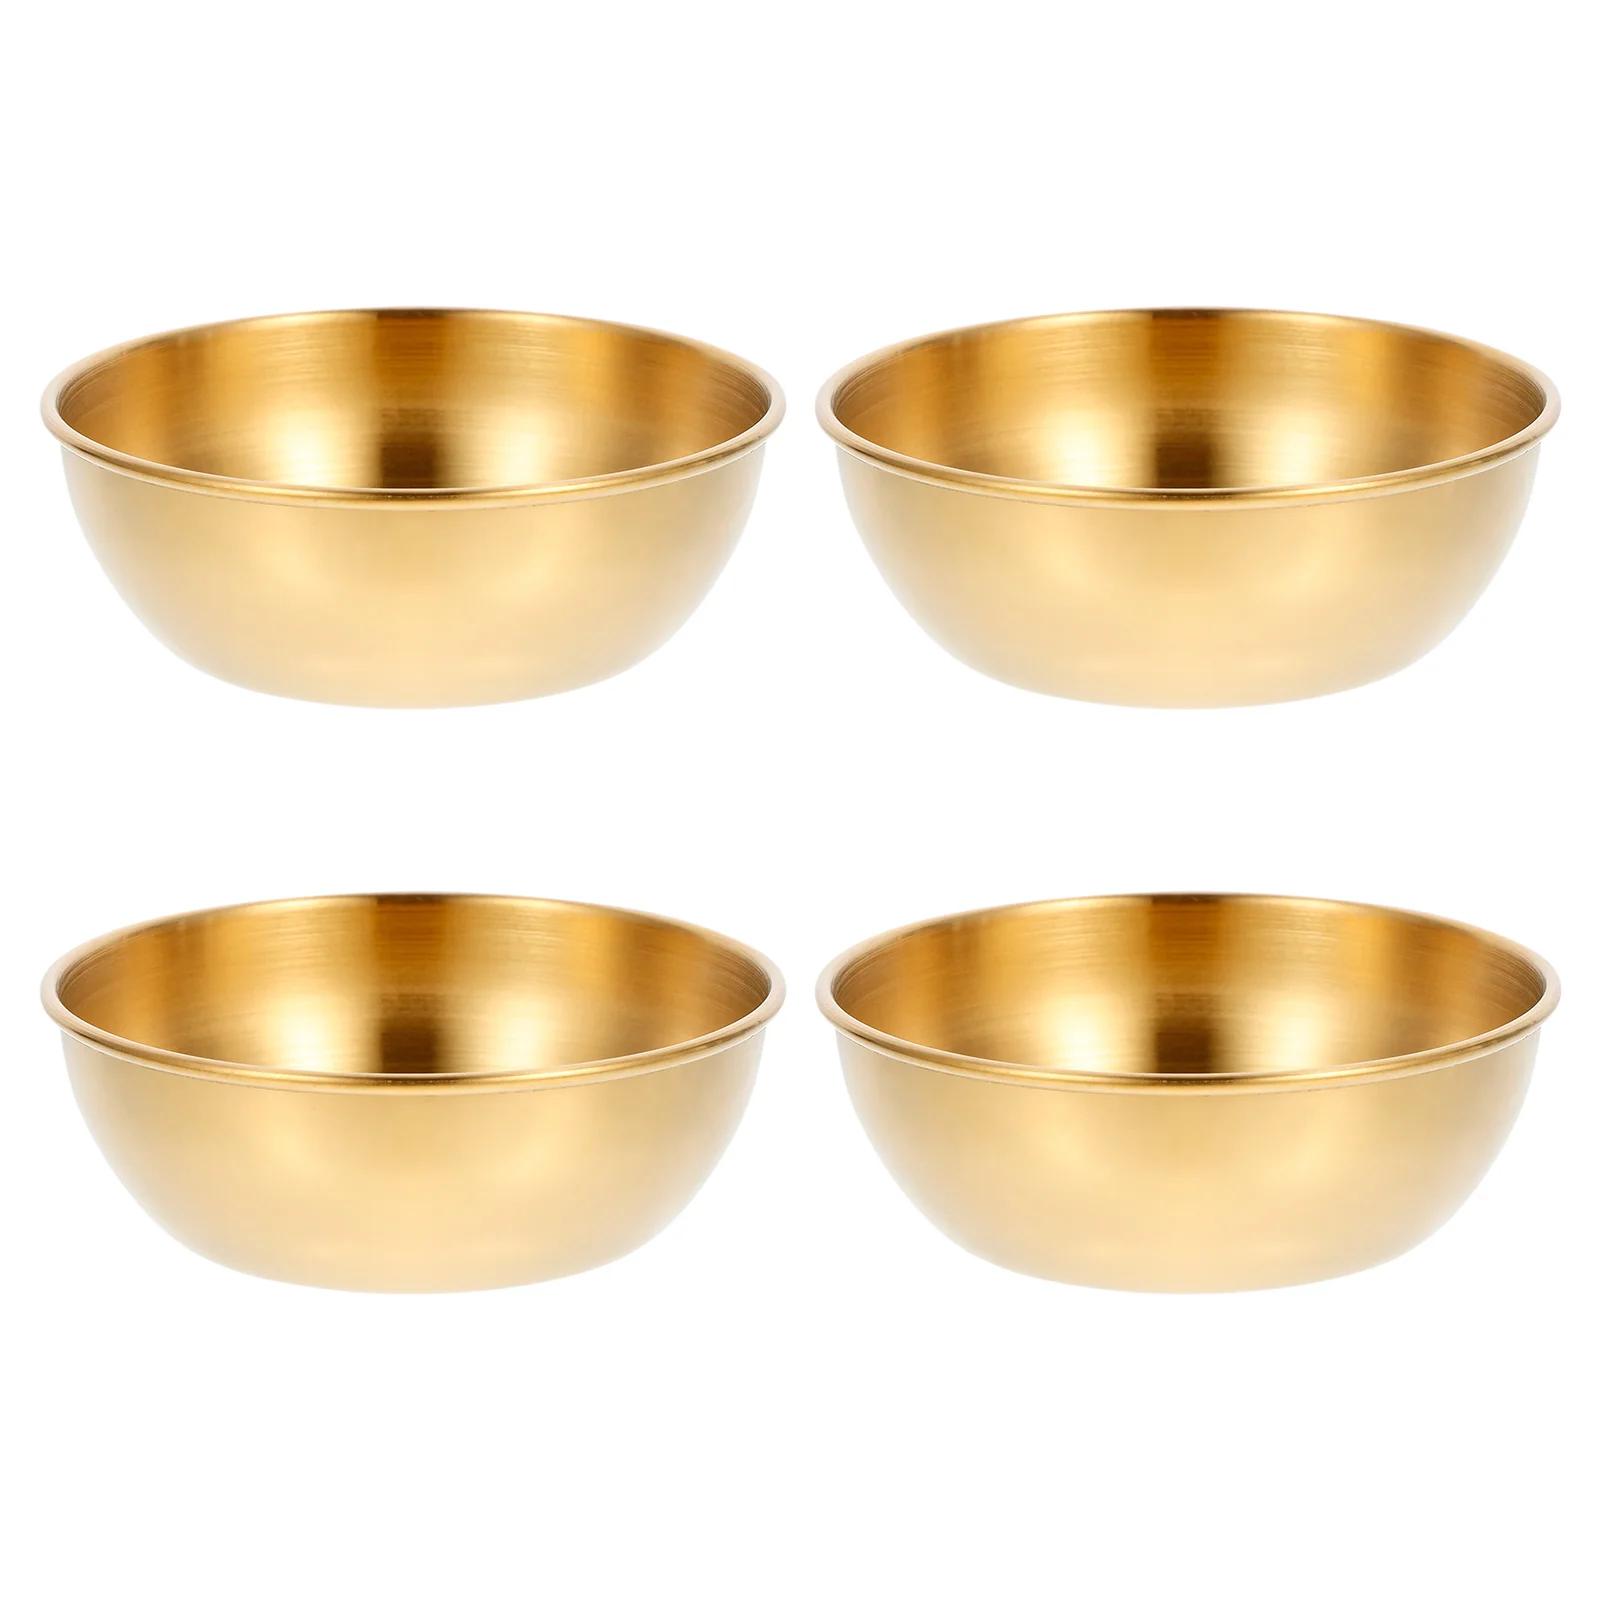 

4pcs wood bowl dipping sauce bowls stainless steel sushi dipping bowl saucers condiment plates round seasoning dishes appetizer